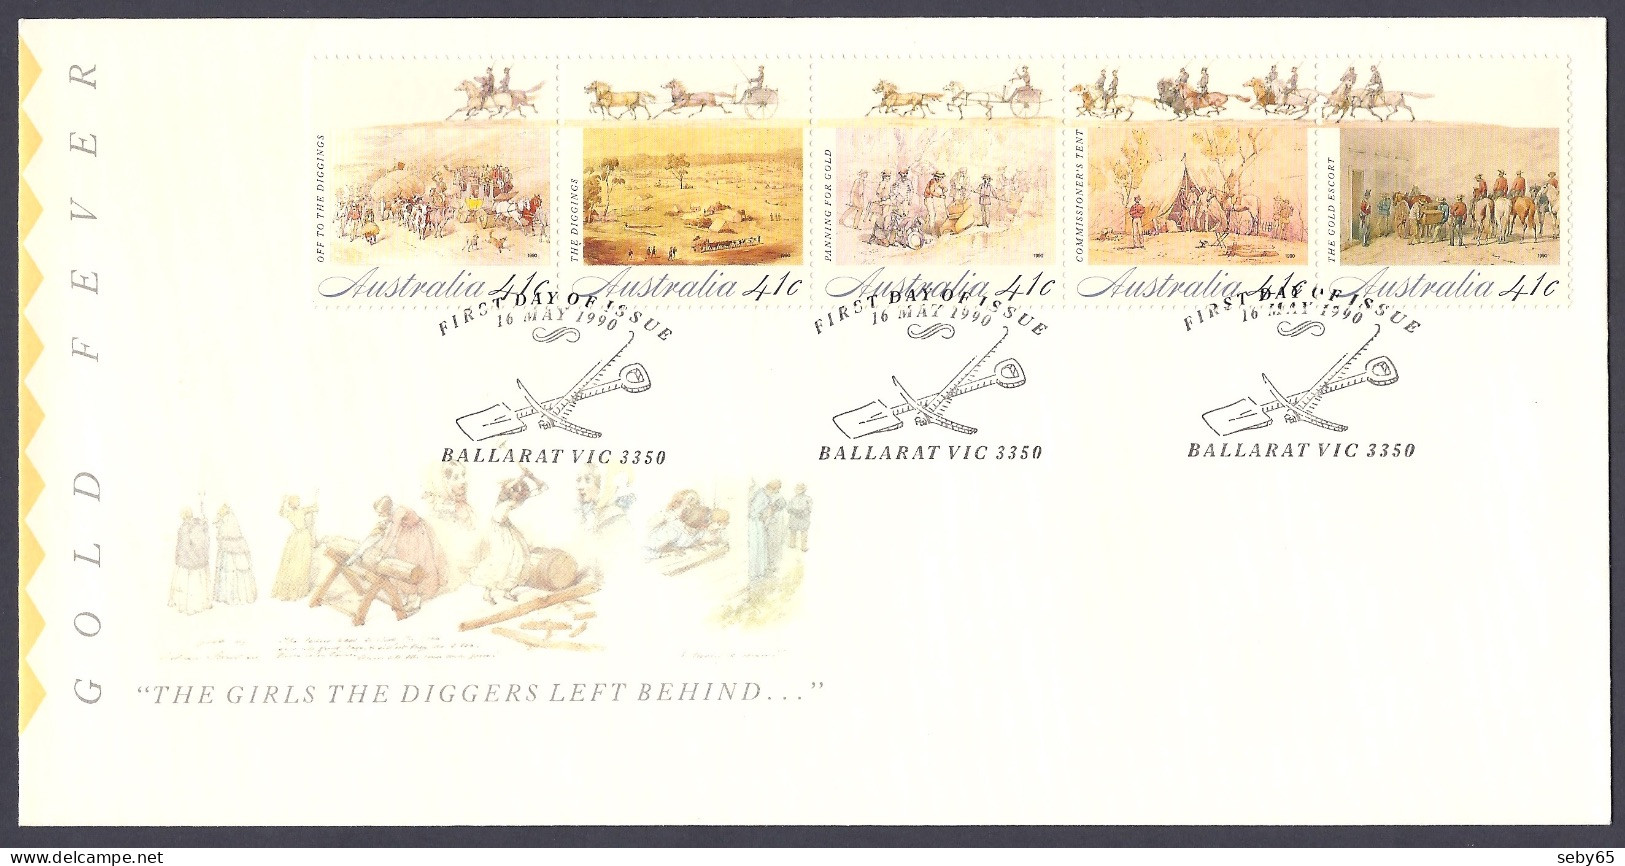 Australia 1990 - Gold Fever, Mining, Horses, Panning For Gold - FDC - FDC